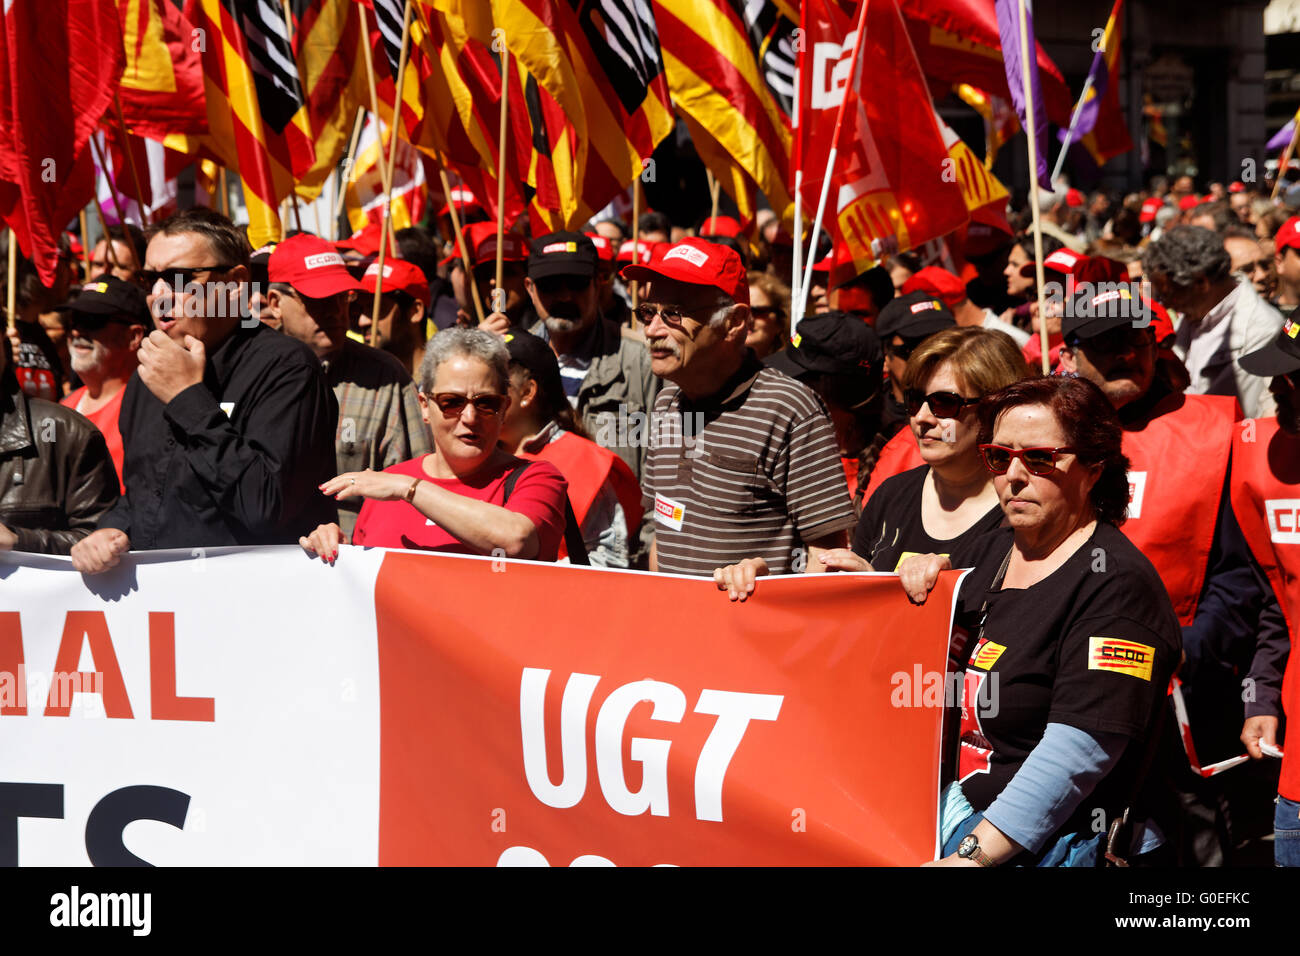 Barcelona, Catalonia, Spain. 01st May, 2016. The both biggest trade ubions of Spain UGT and CCOO demonstrating during 1st May festivities. CCOO are the communist Workers Commissions, Comissiones Obreras. UGT is the General Union of Workers, Union General de Trabajadores. Karl Burkhof/Alamy Live News Stock Photo